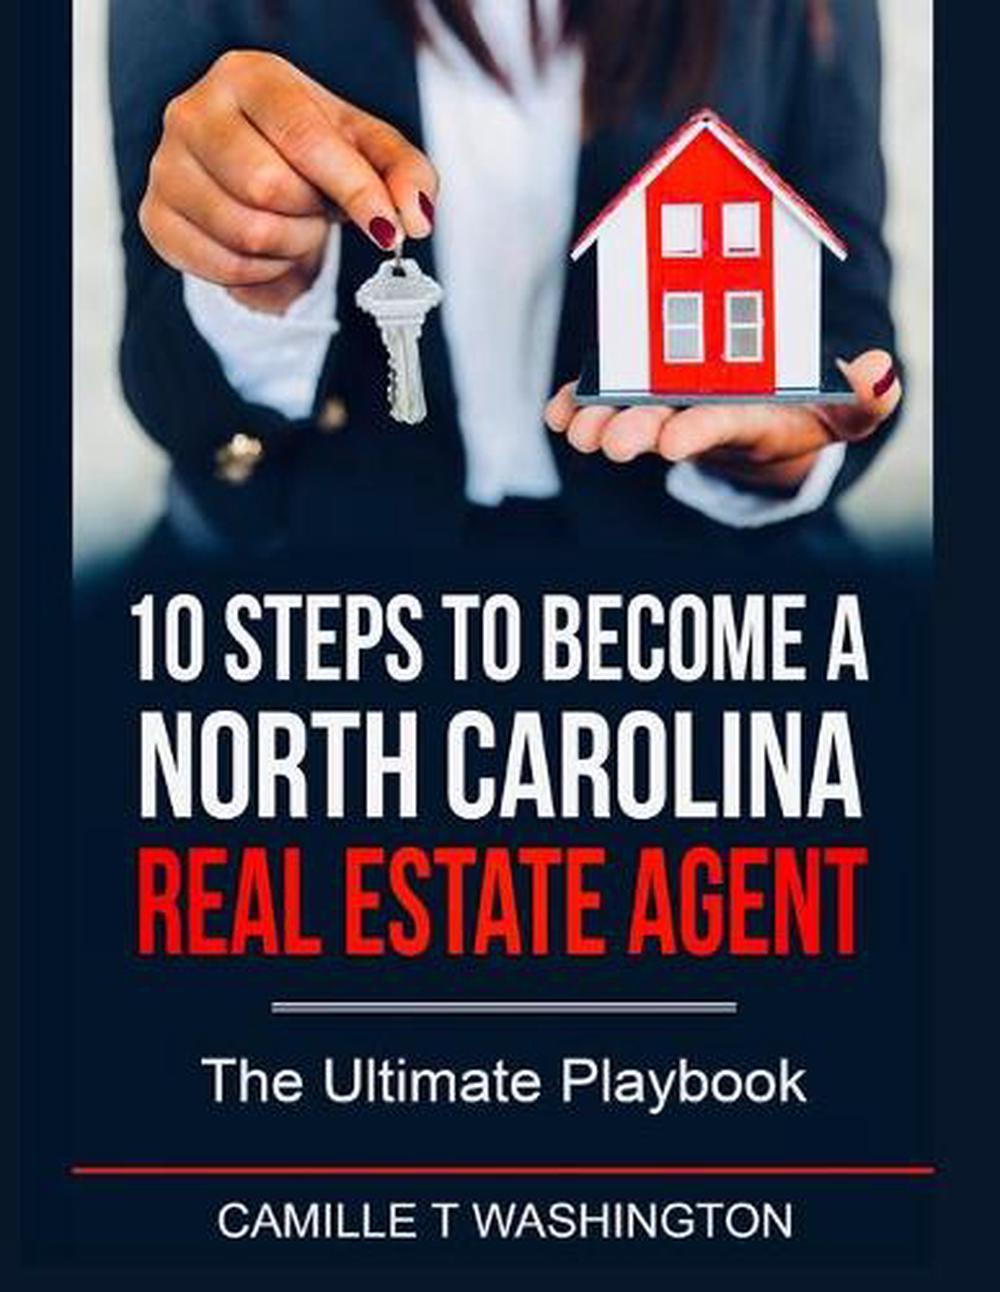 How to become a real estate agent north carolina